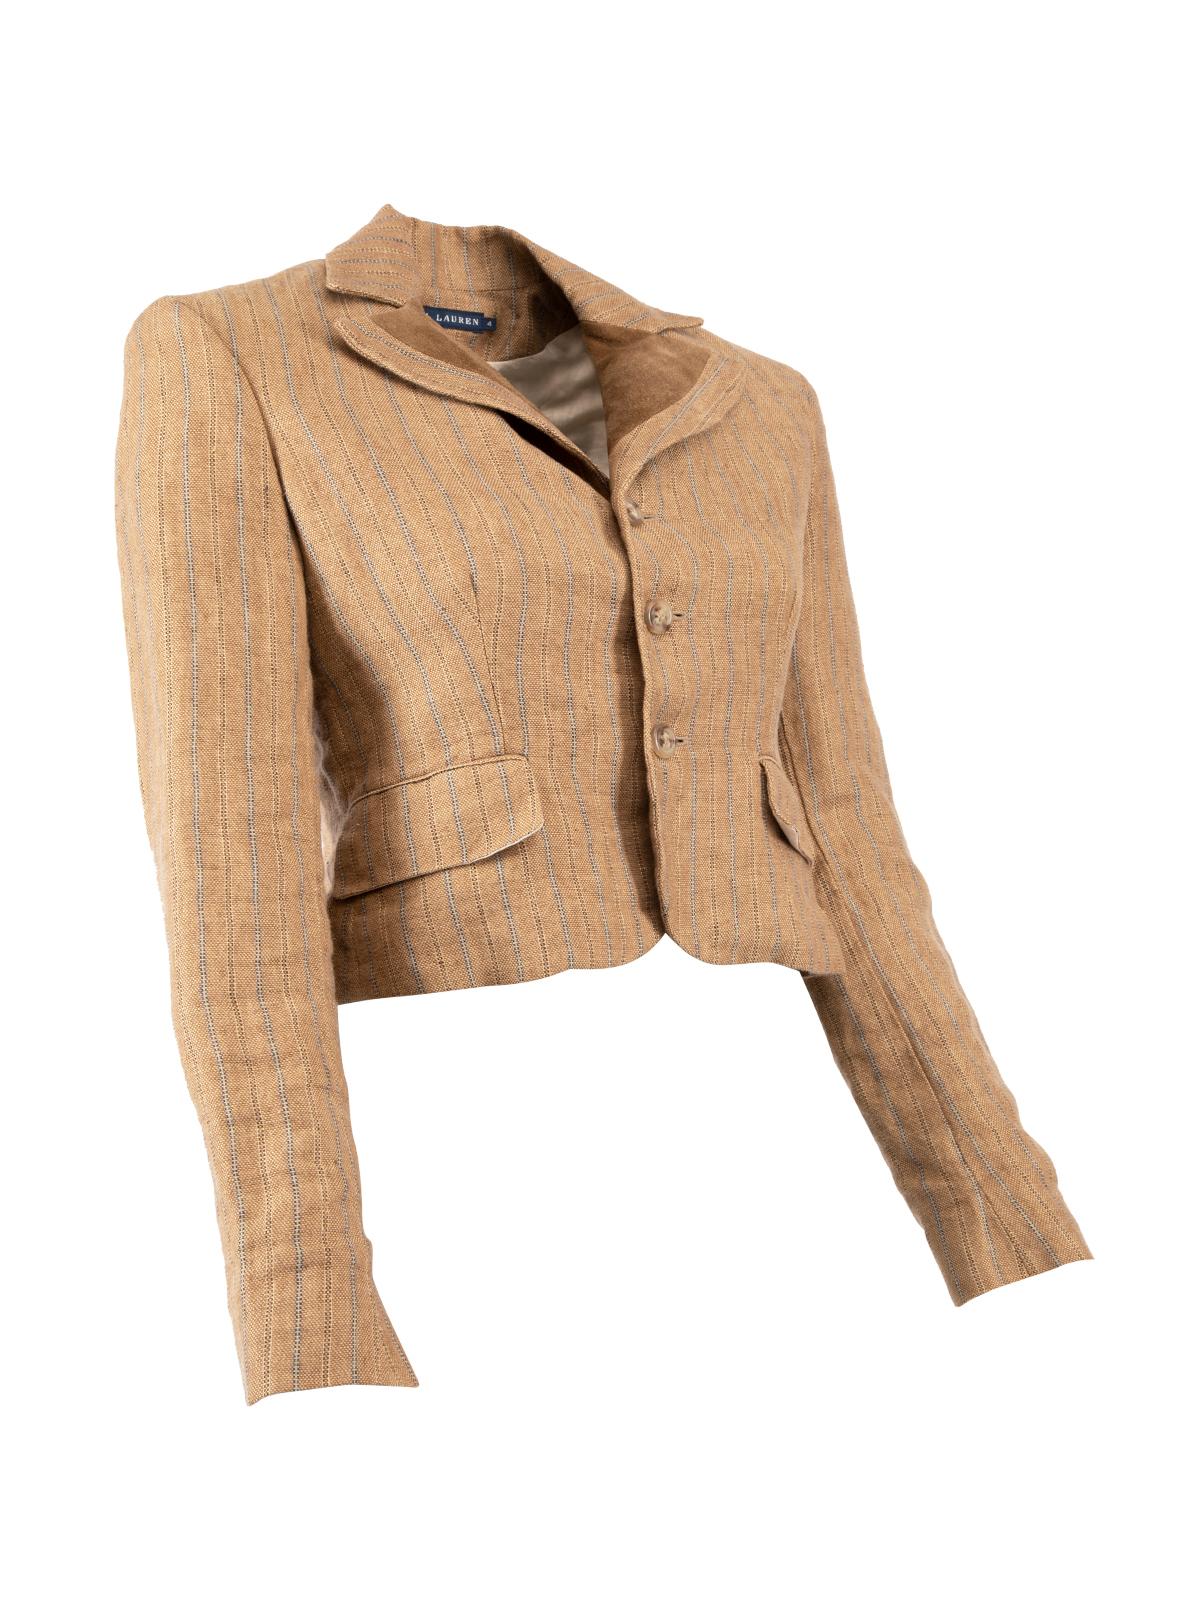 CONDITION is Good. Minor wear to blazer is evident. Light fading to suede matrial around the lapel and few loose threads on this used Ralph Lauren designer resale item. Details Brown Linen Cotton lining Cropped Fitted Long sleeves Suede detailing on